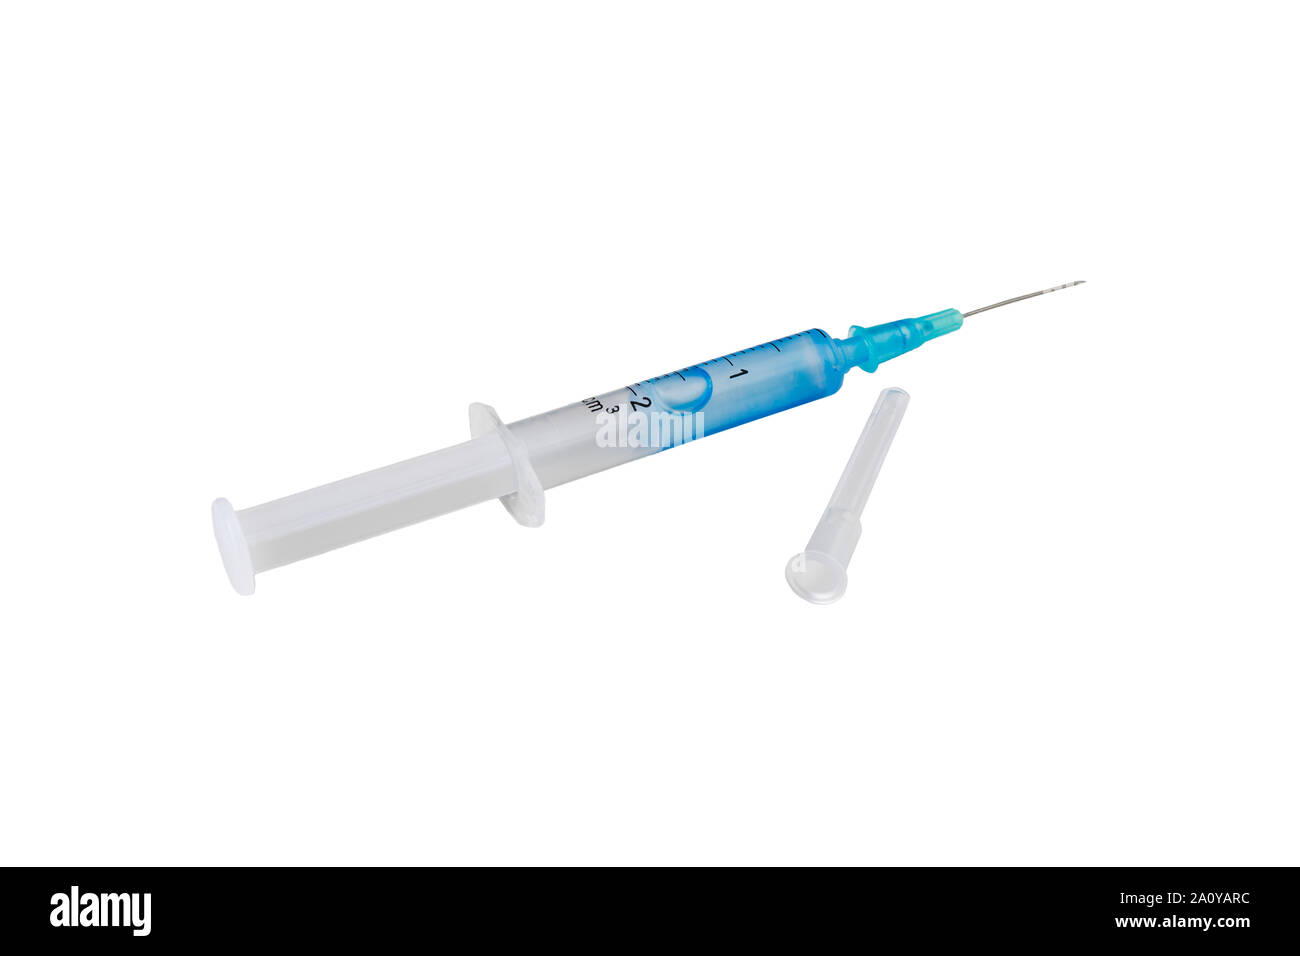 Syringe with blue liquid and a needle isolated on white background without shadow. Stock Photo